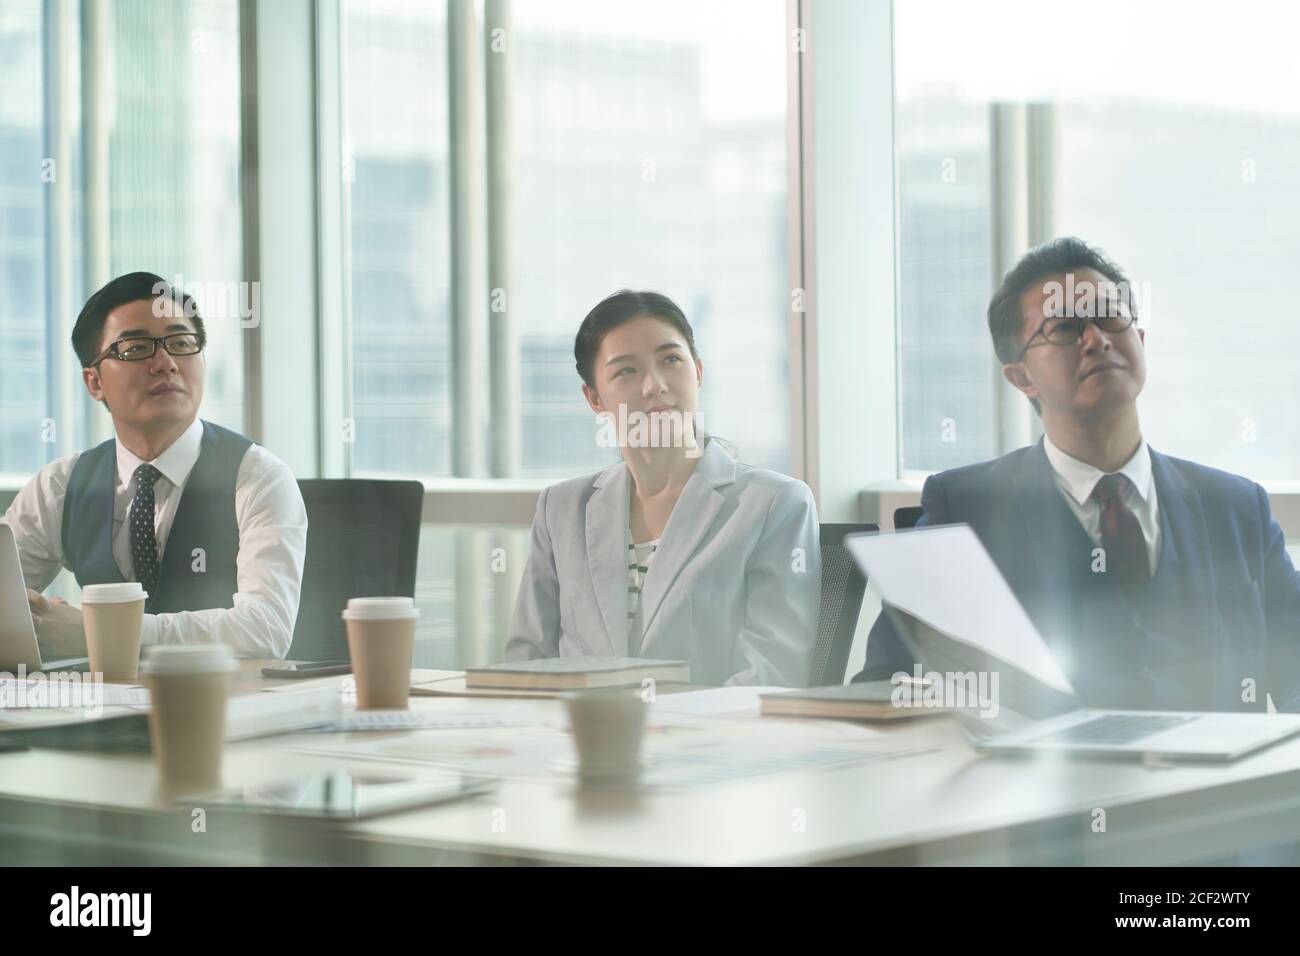 through-the-glass shot of three asian corporate executives listening with attention during business presentation Stock Photo